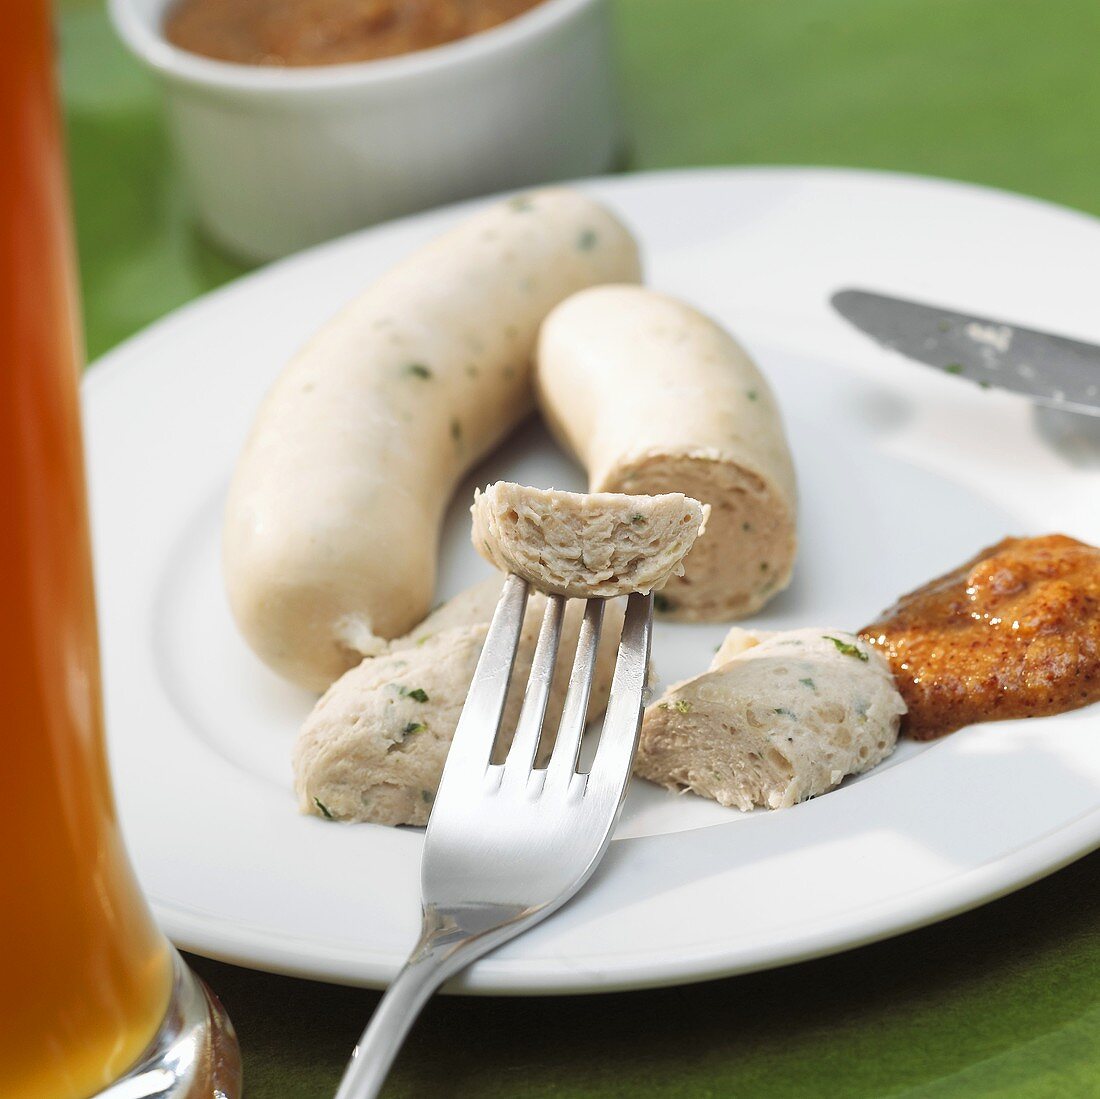 Weisswurst (Bavarian veal sausages) with mustard